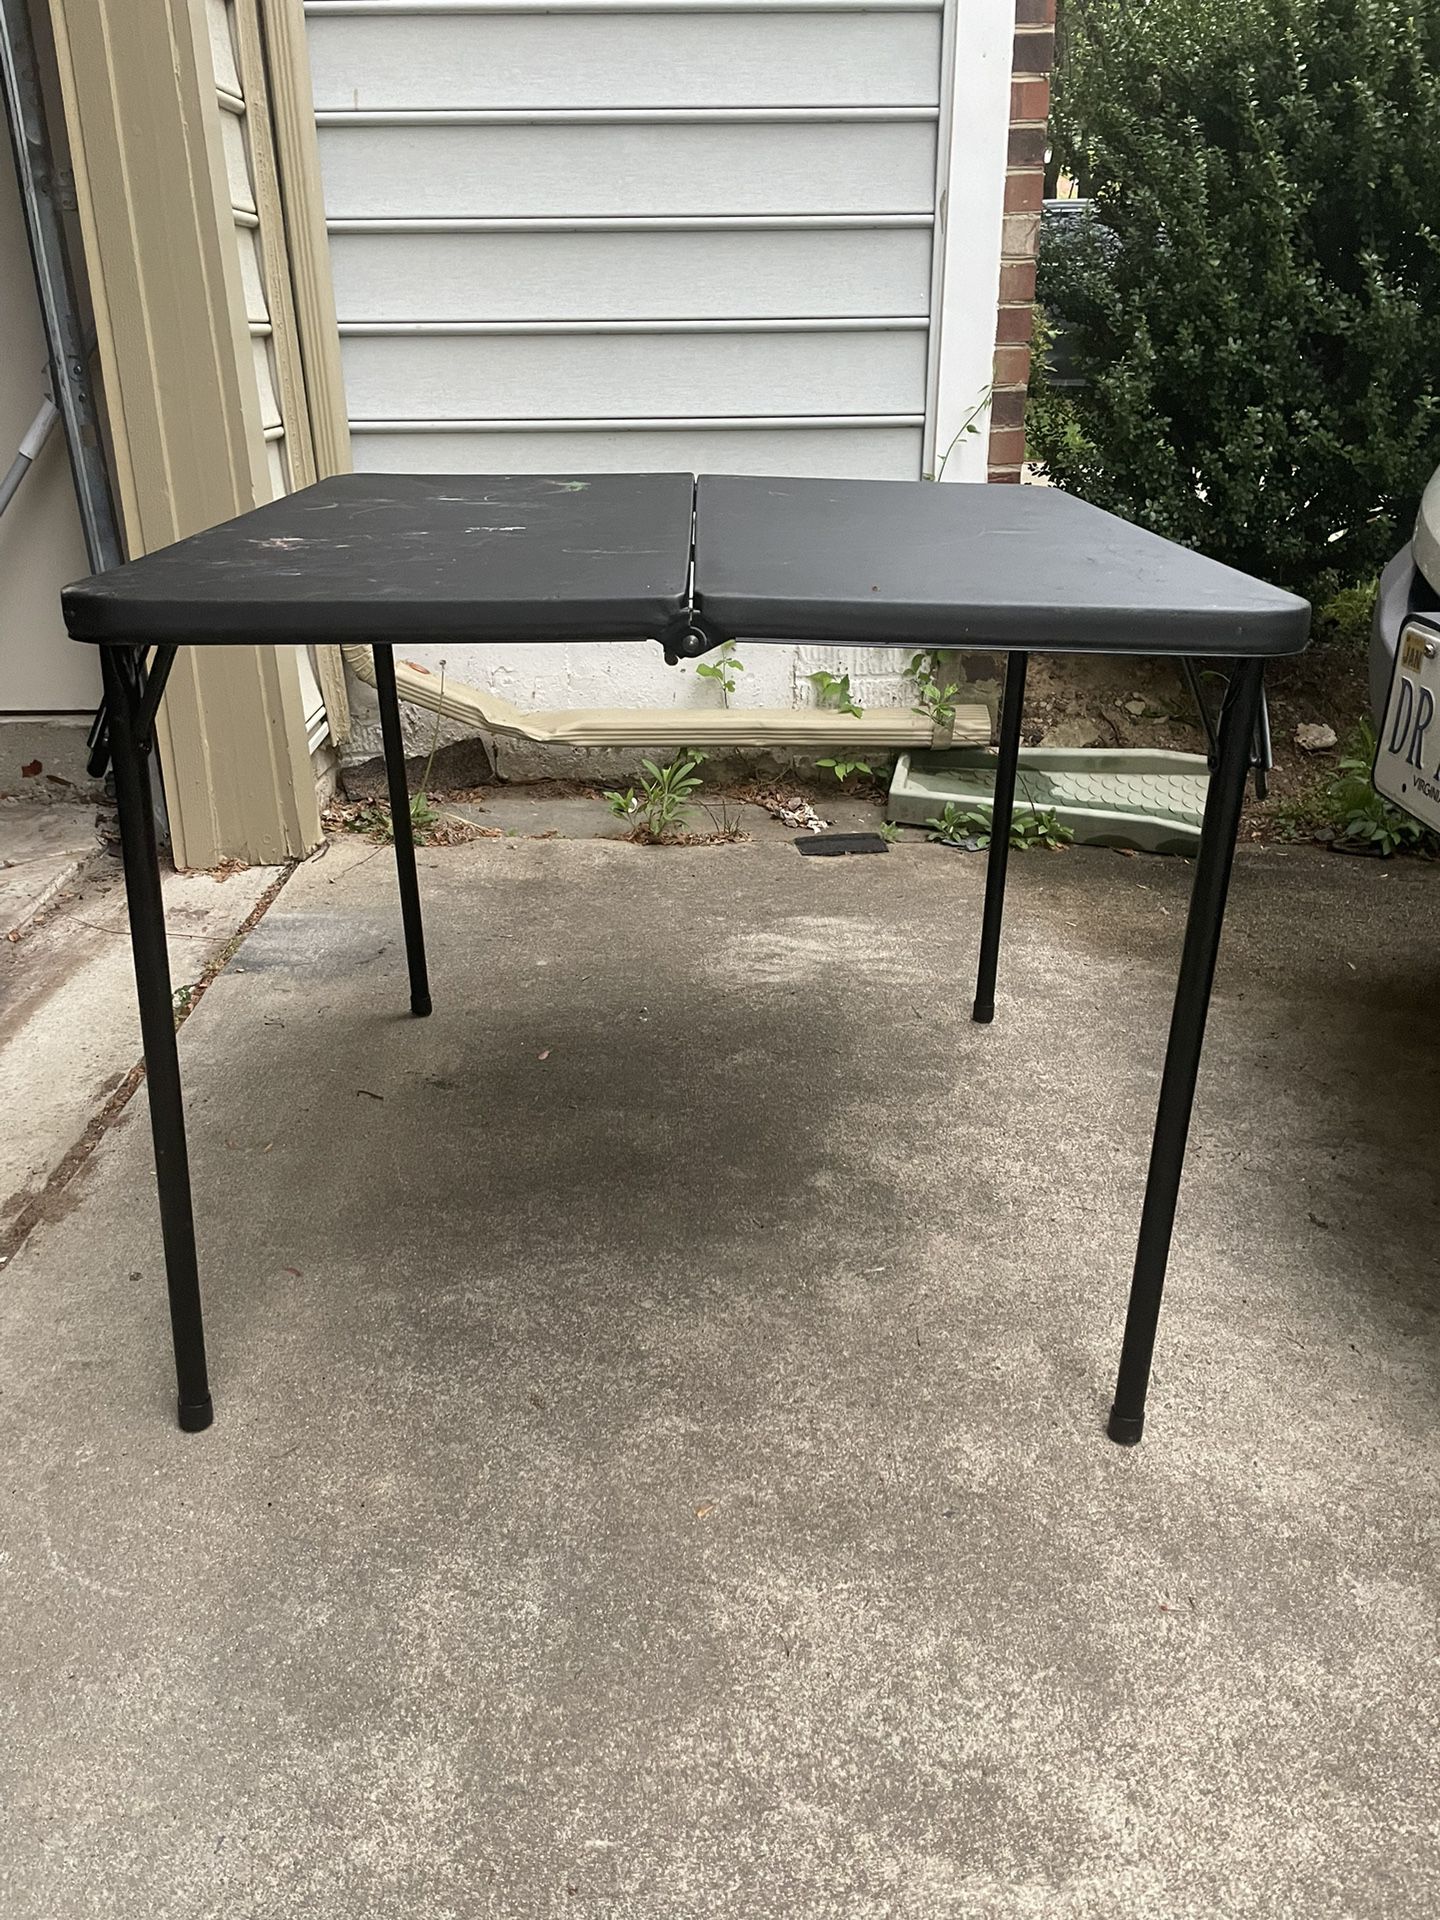 Camping adjustable table